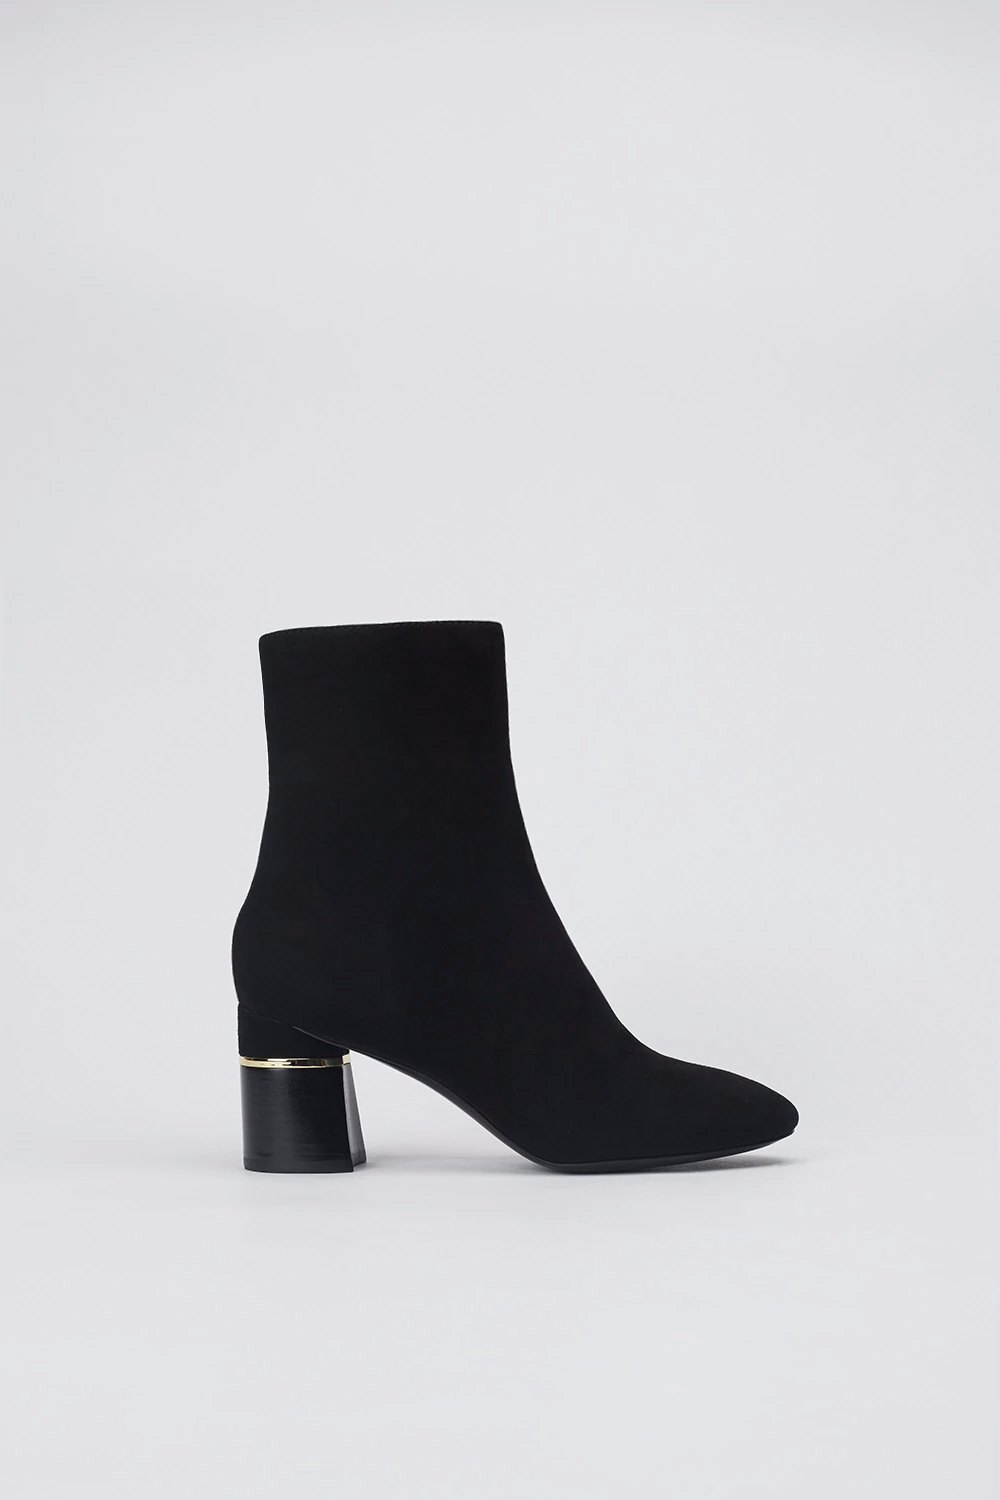 The 3.1 Phillip Lim Sale Has Every Type Of Winter Shoe Your Closet ...